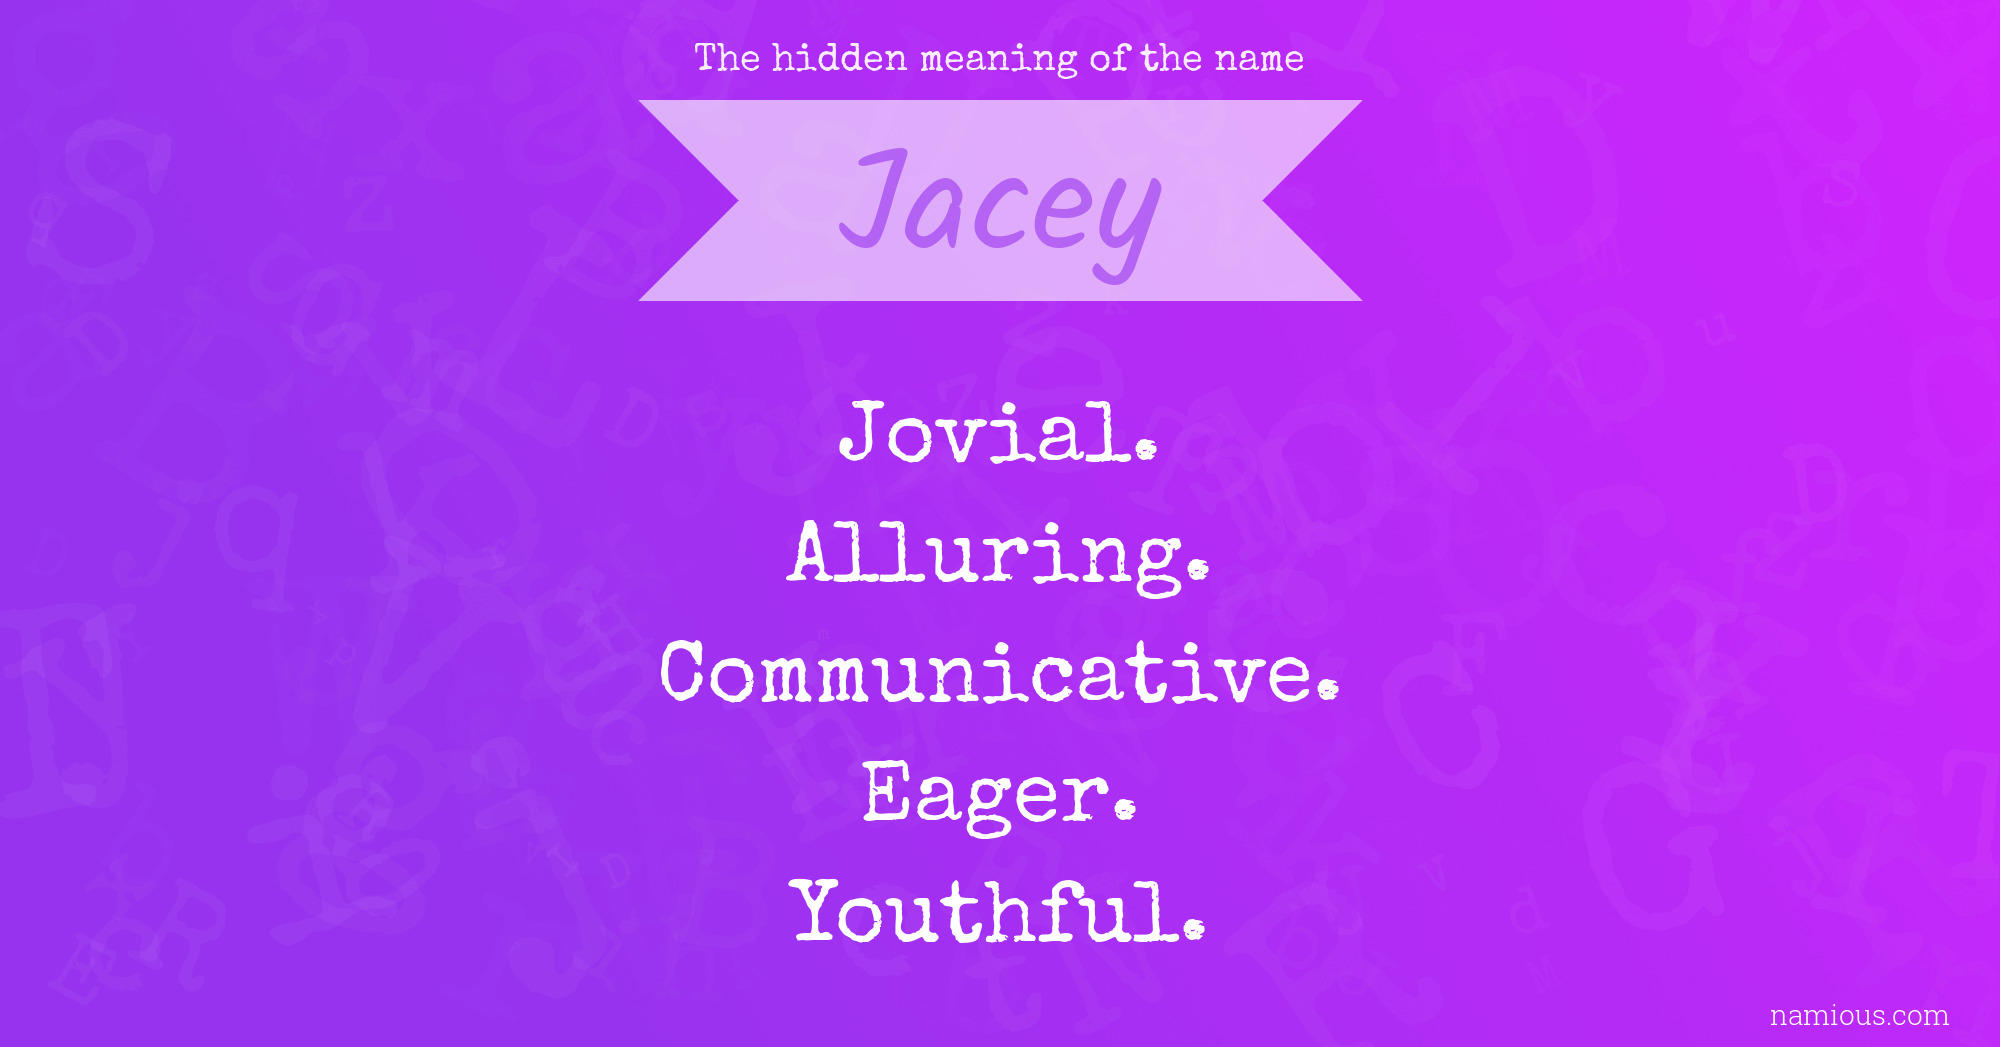 The hidden meaning of the name Jacey